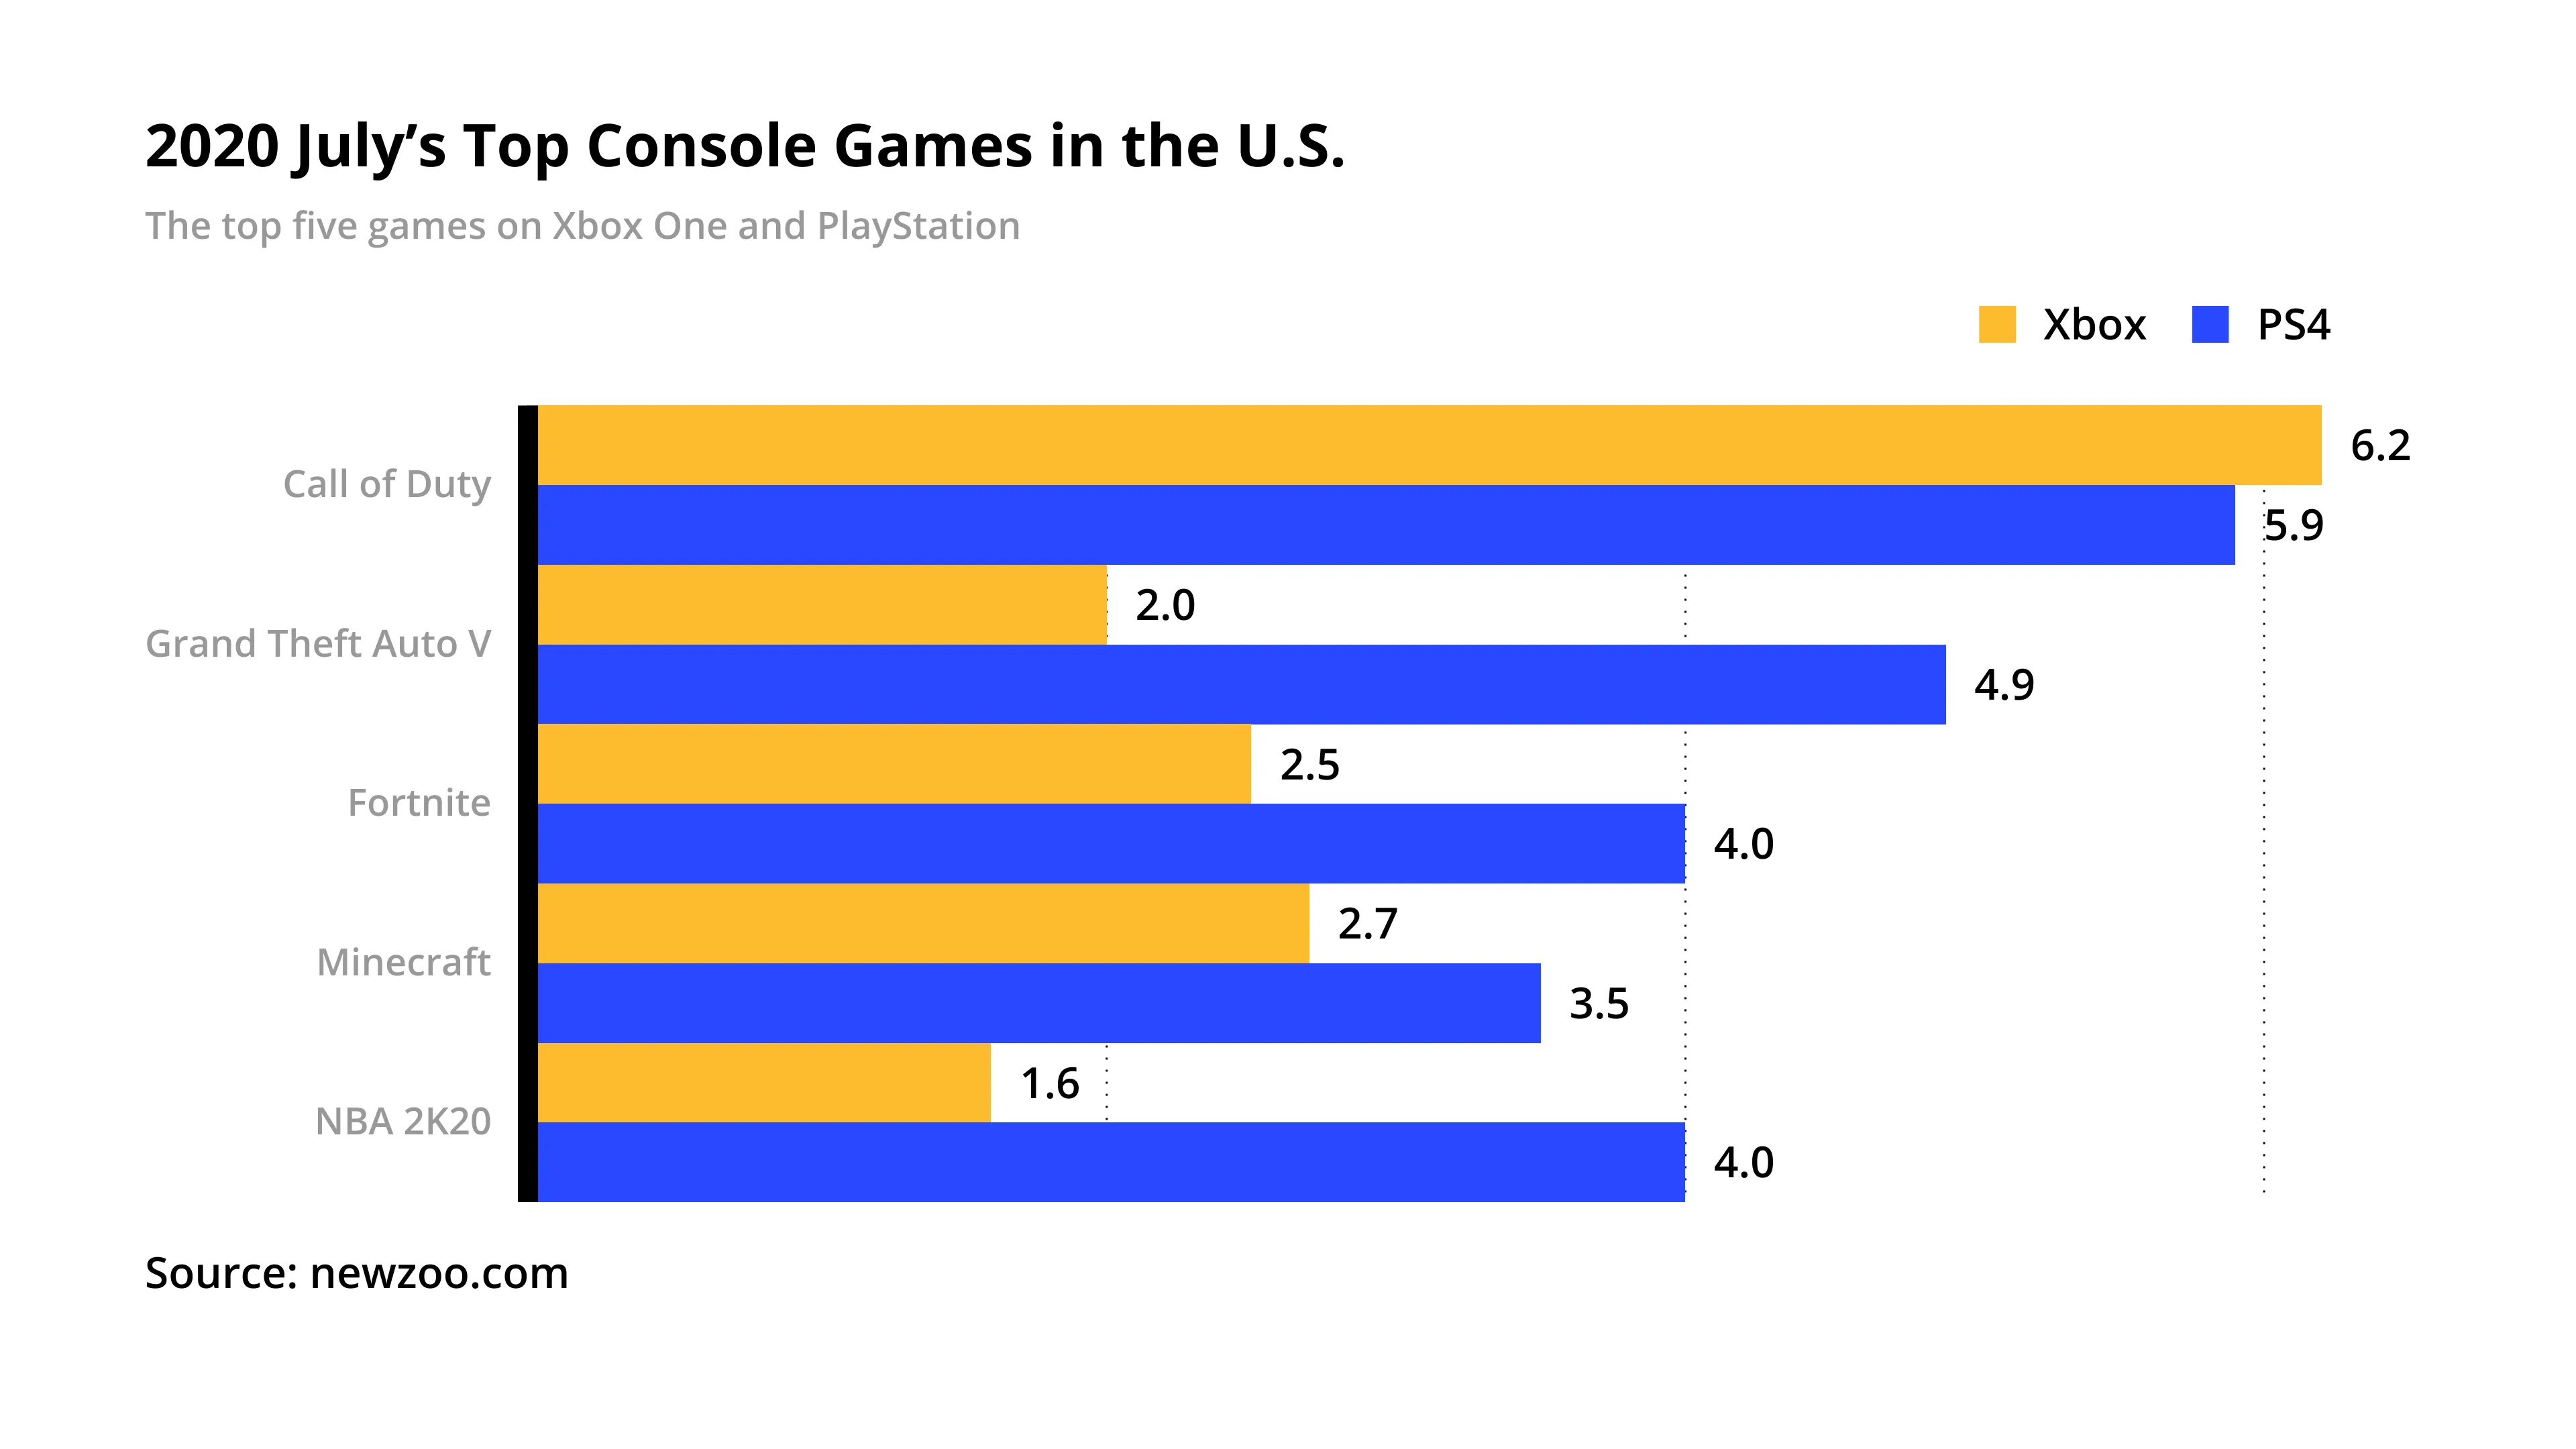 2020 July’s Top Console Games in the U.S